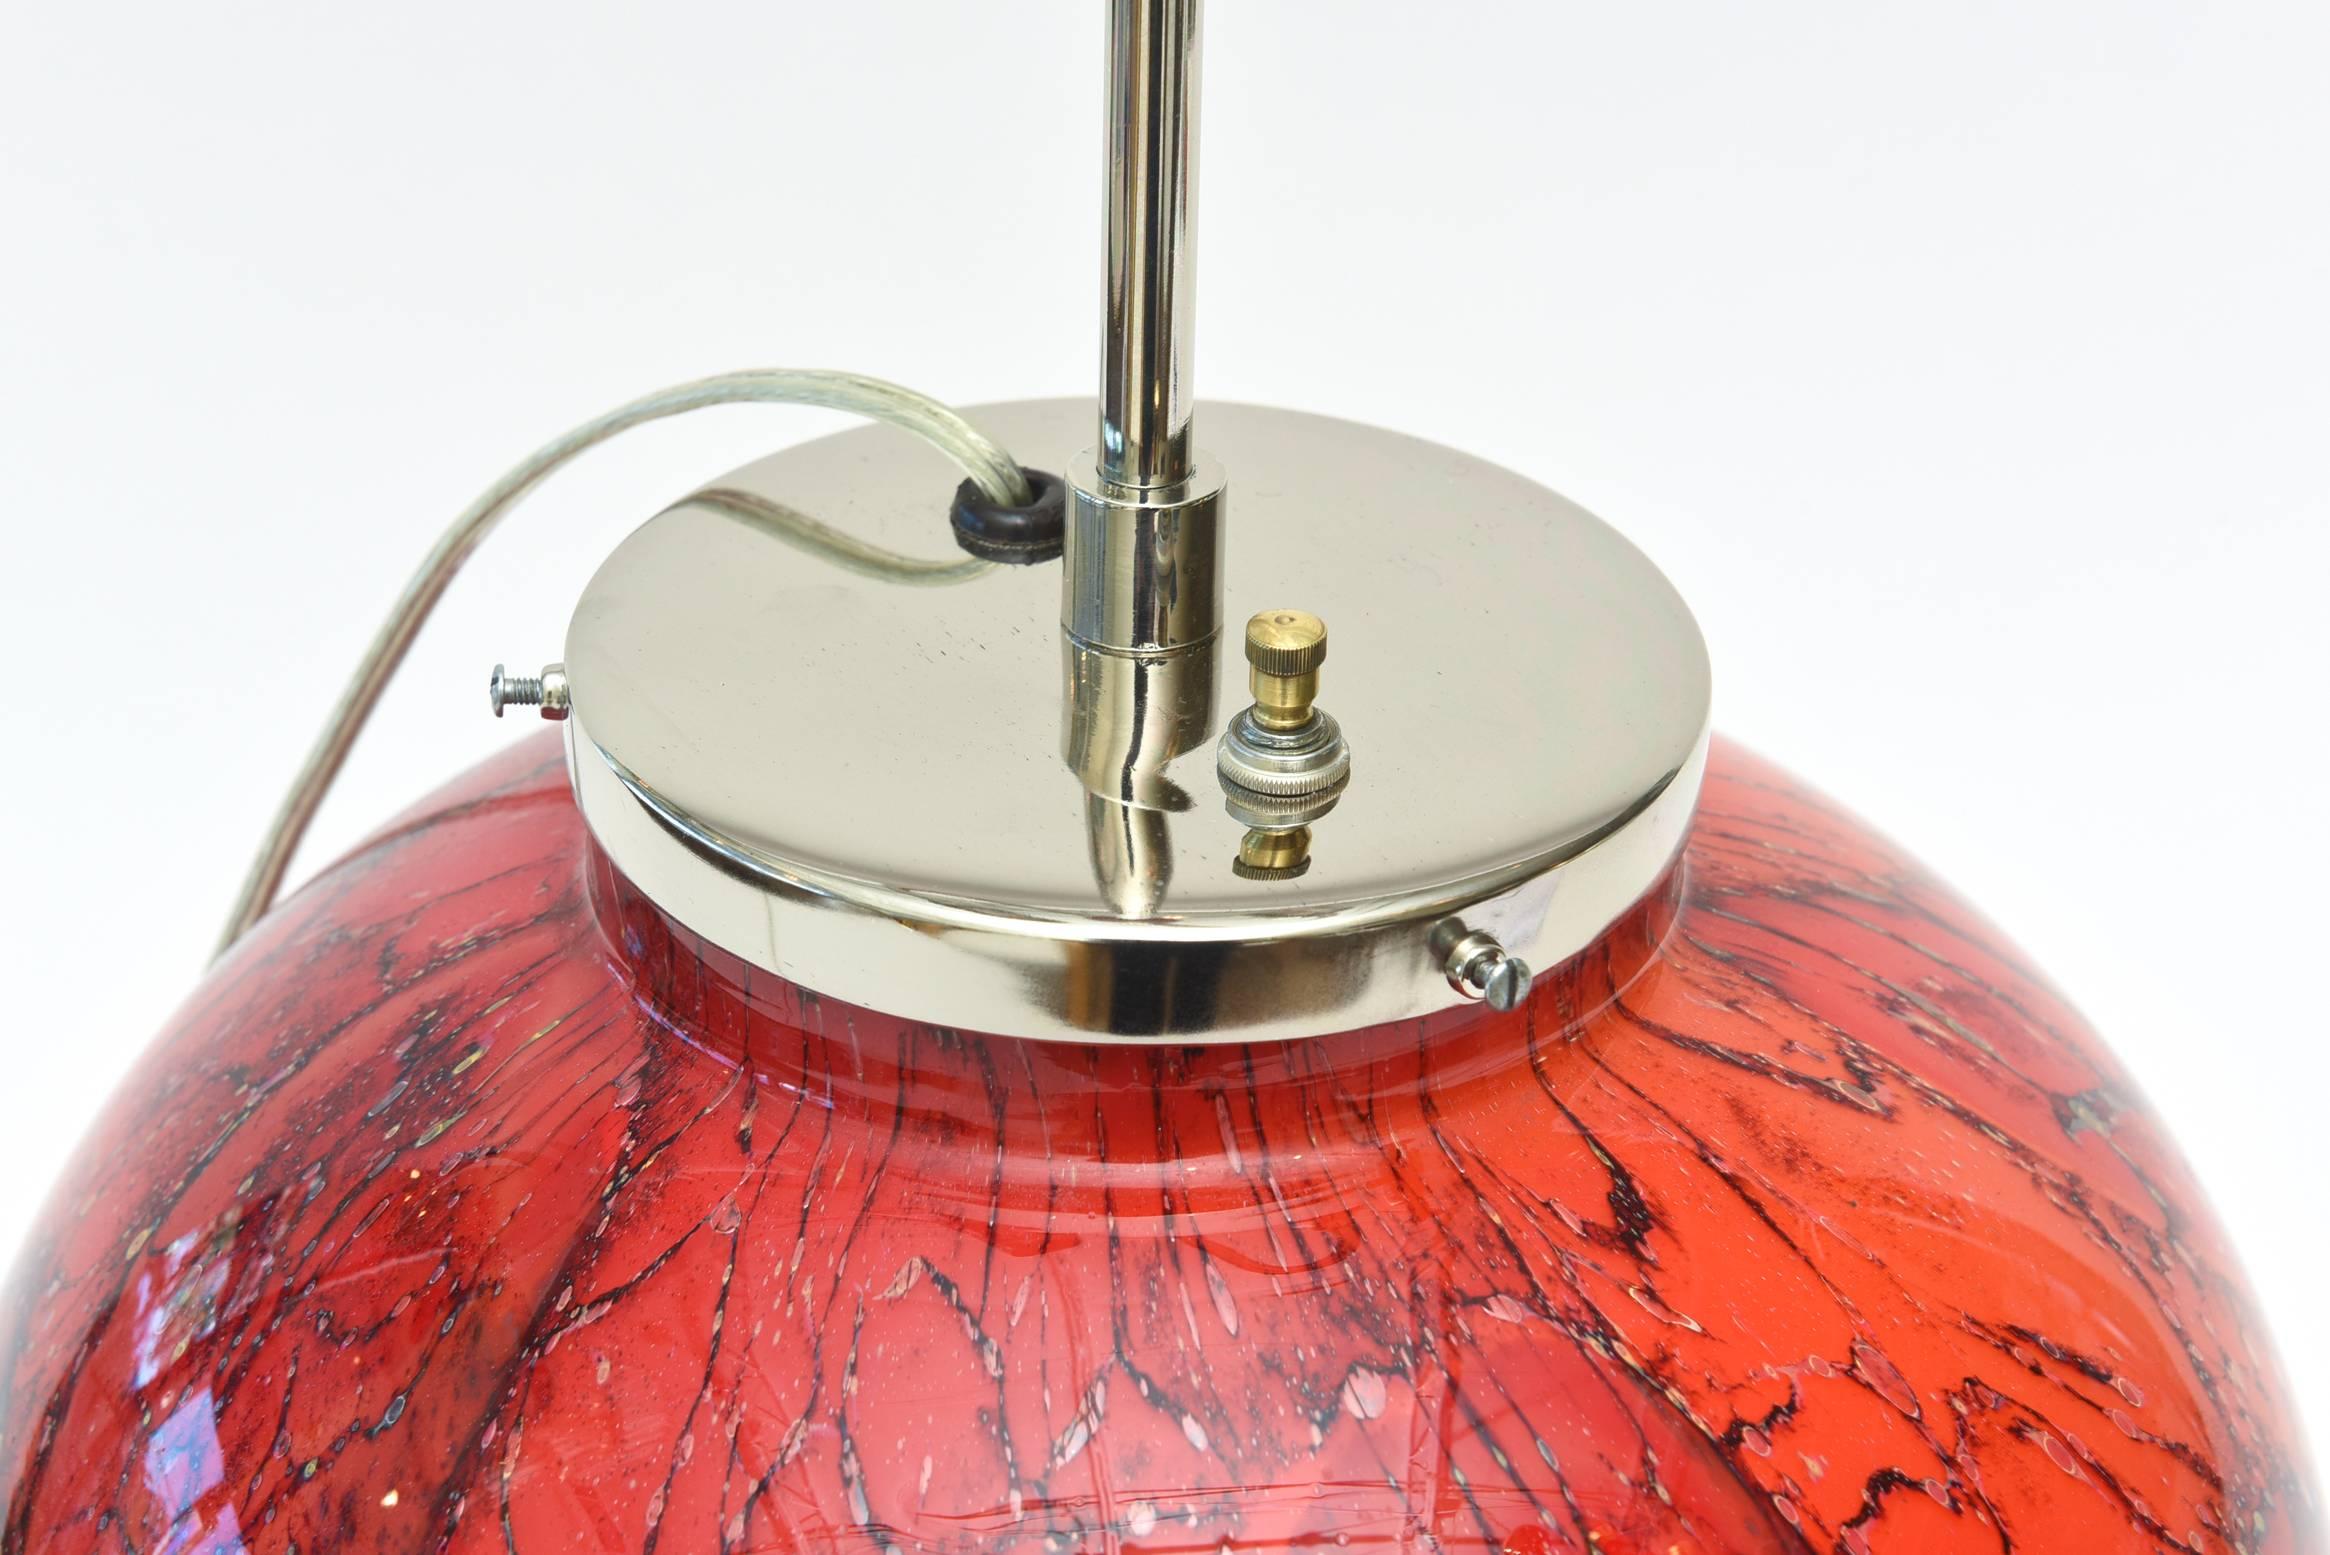 Mid-20th Century Vintage Wmf Red, Orange, White Black Glass and Chrome Sphere Table or Desk Lamp For Sale